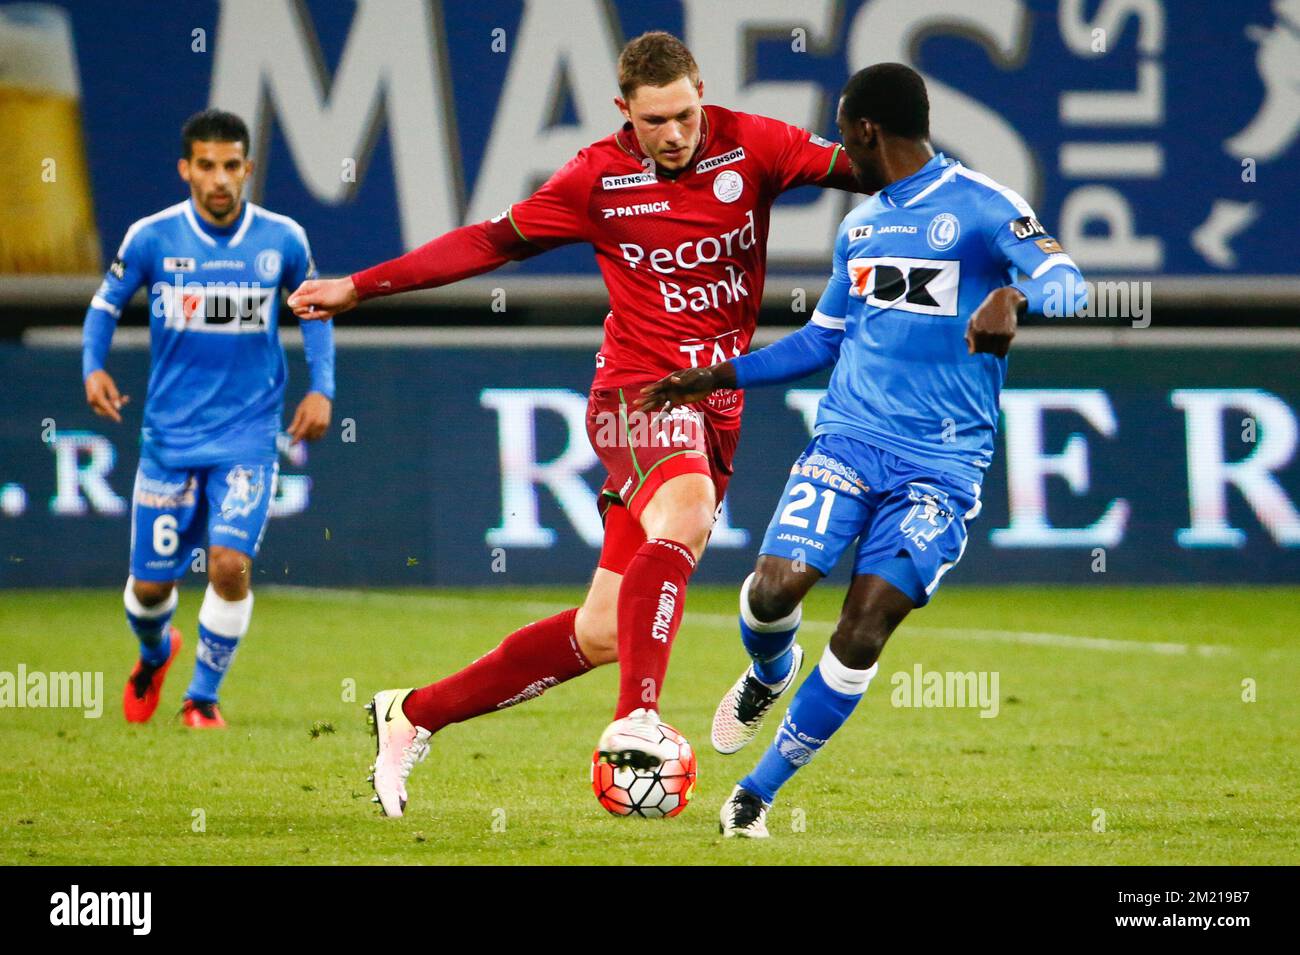 Essevee's Henrik Dalsgaard and Gent's Nana Asare fight for the ball during the Jupiler Pro League match between KAA Gent and Zulte Waregem, in Gent, Friday 01 April 2016, on day 1 of the Play-off 1 of the Belgian soccer championship.  Stock Photo